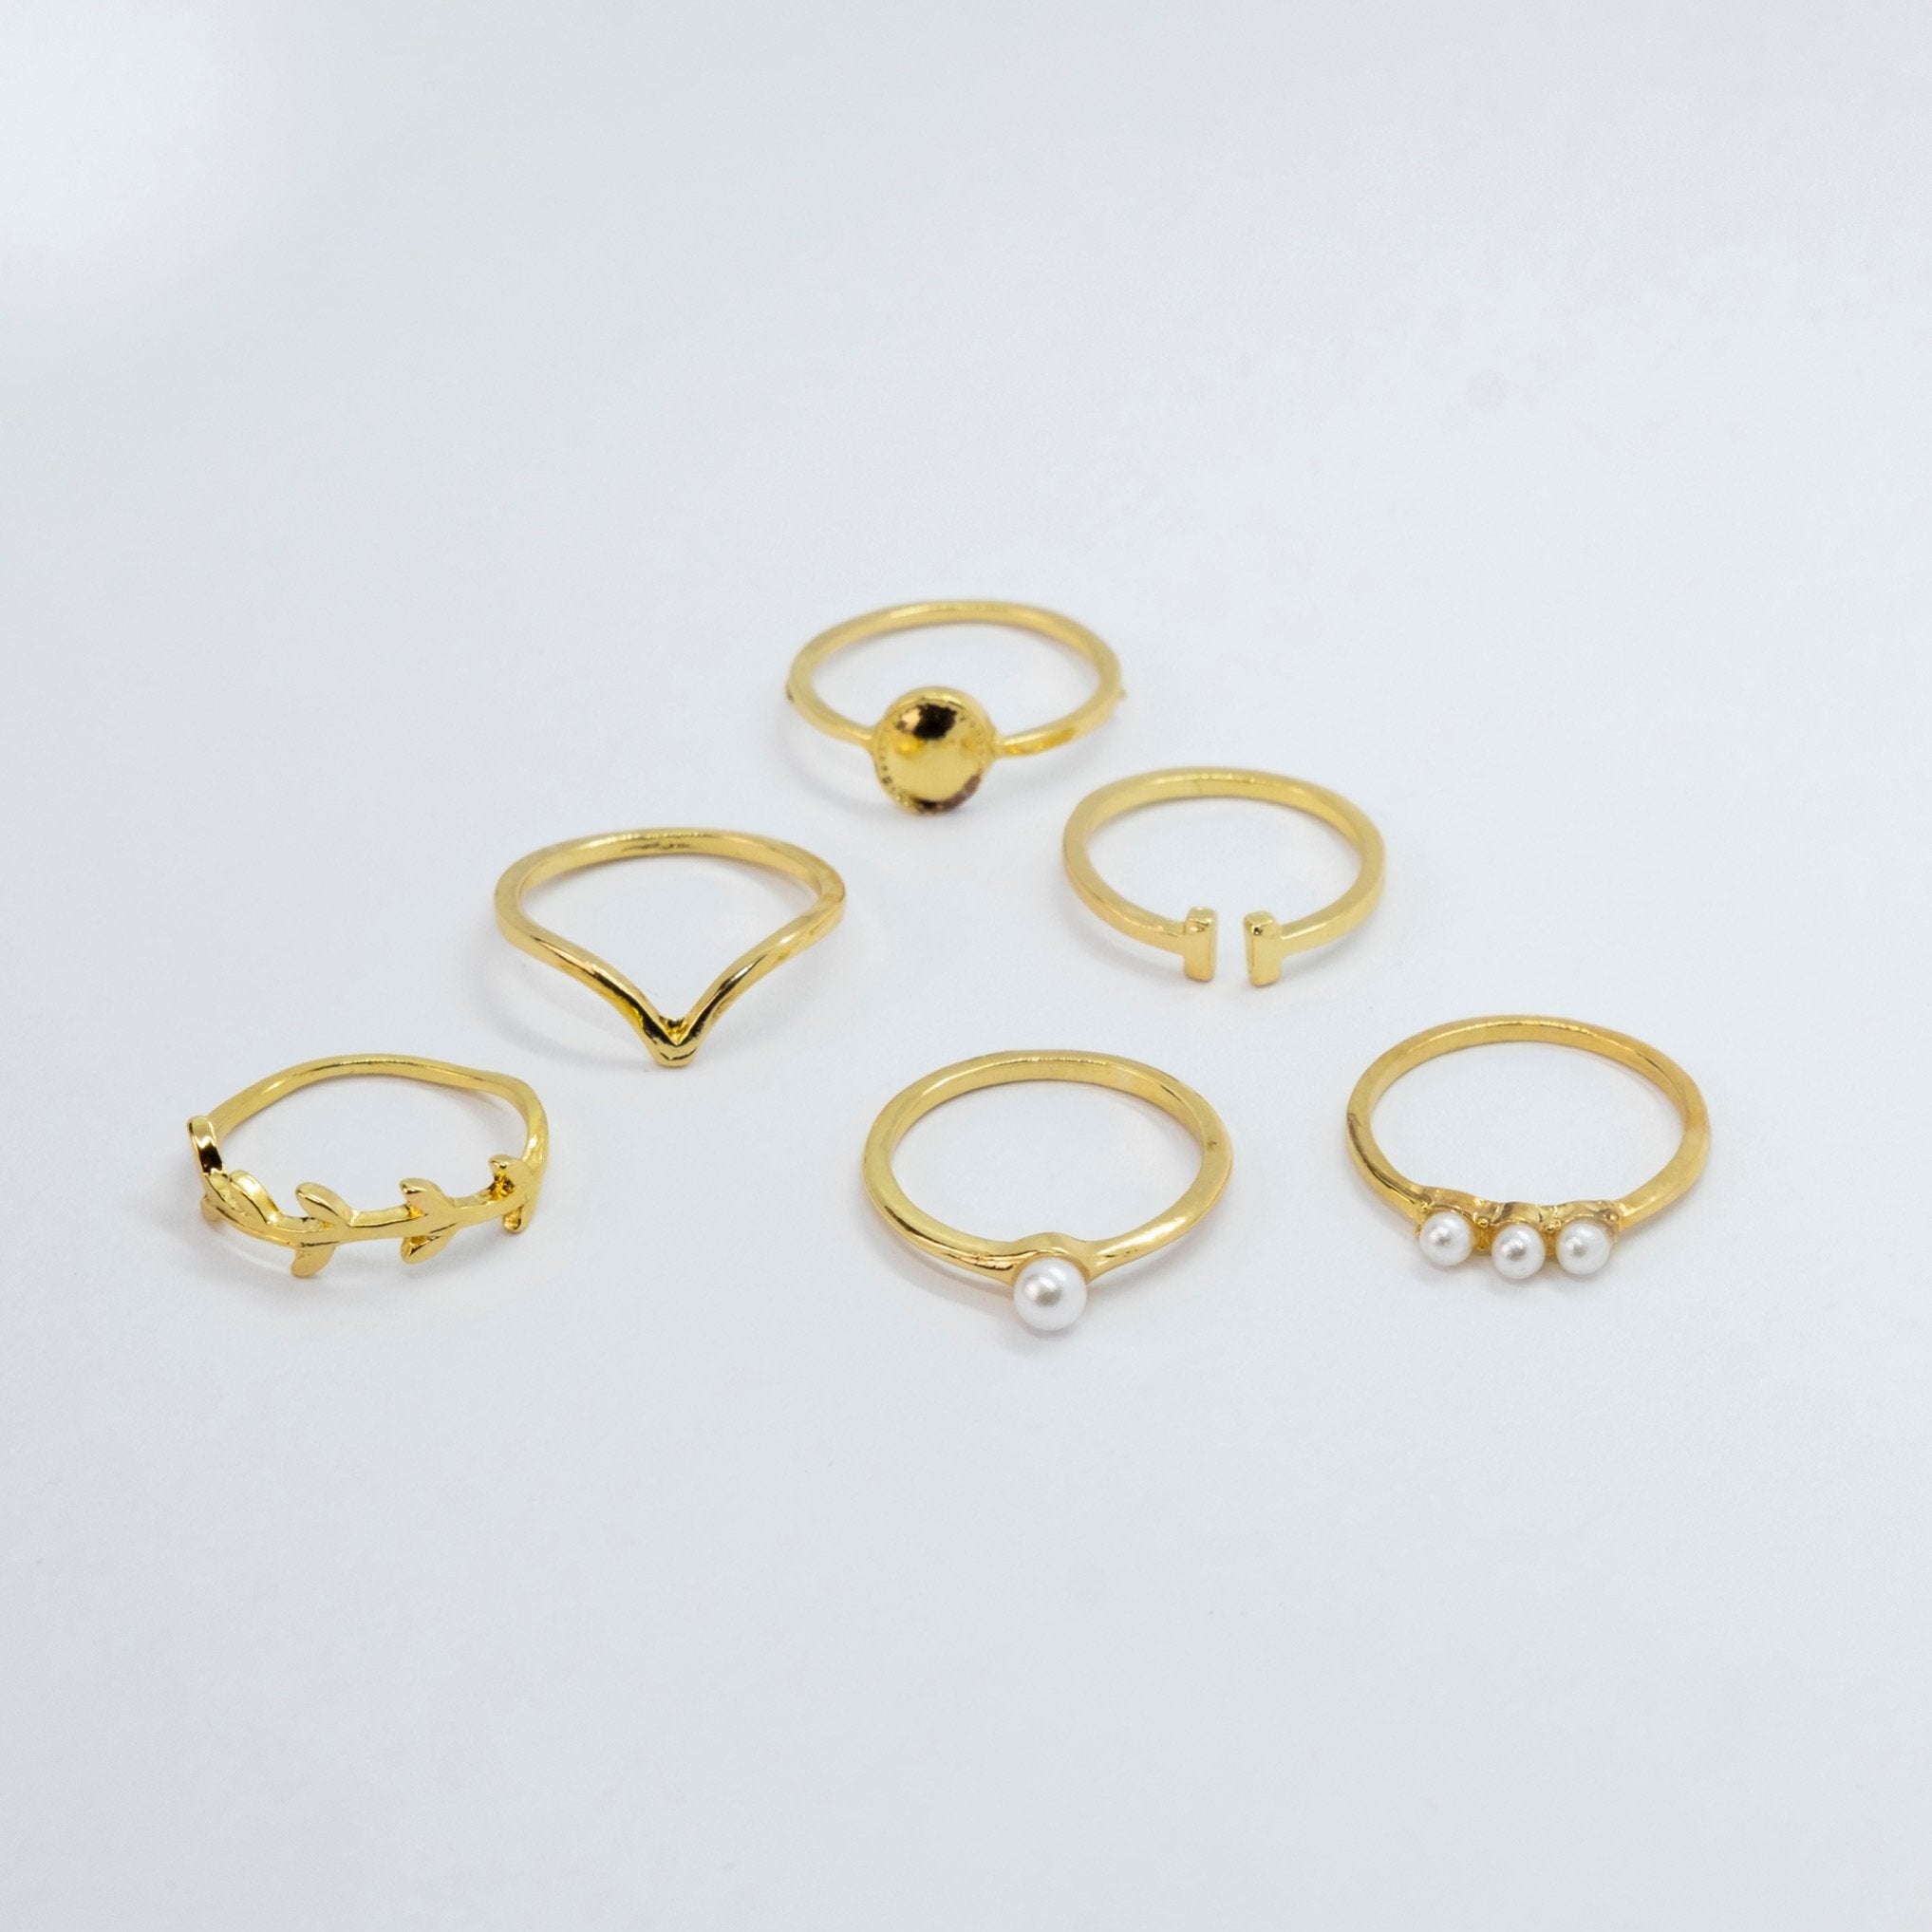 6 Piece Gold Plated Oxidised Bohemian Vintage Tribal Stacking Retro Ring Set The Colourful Aura